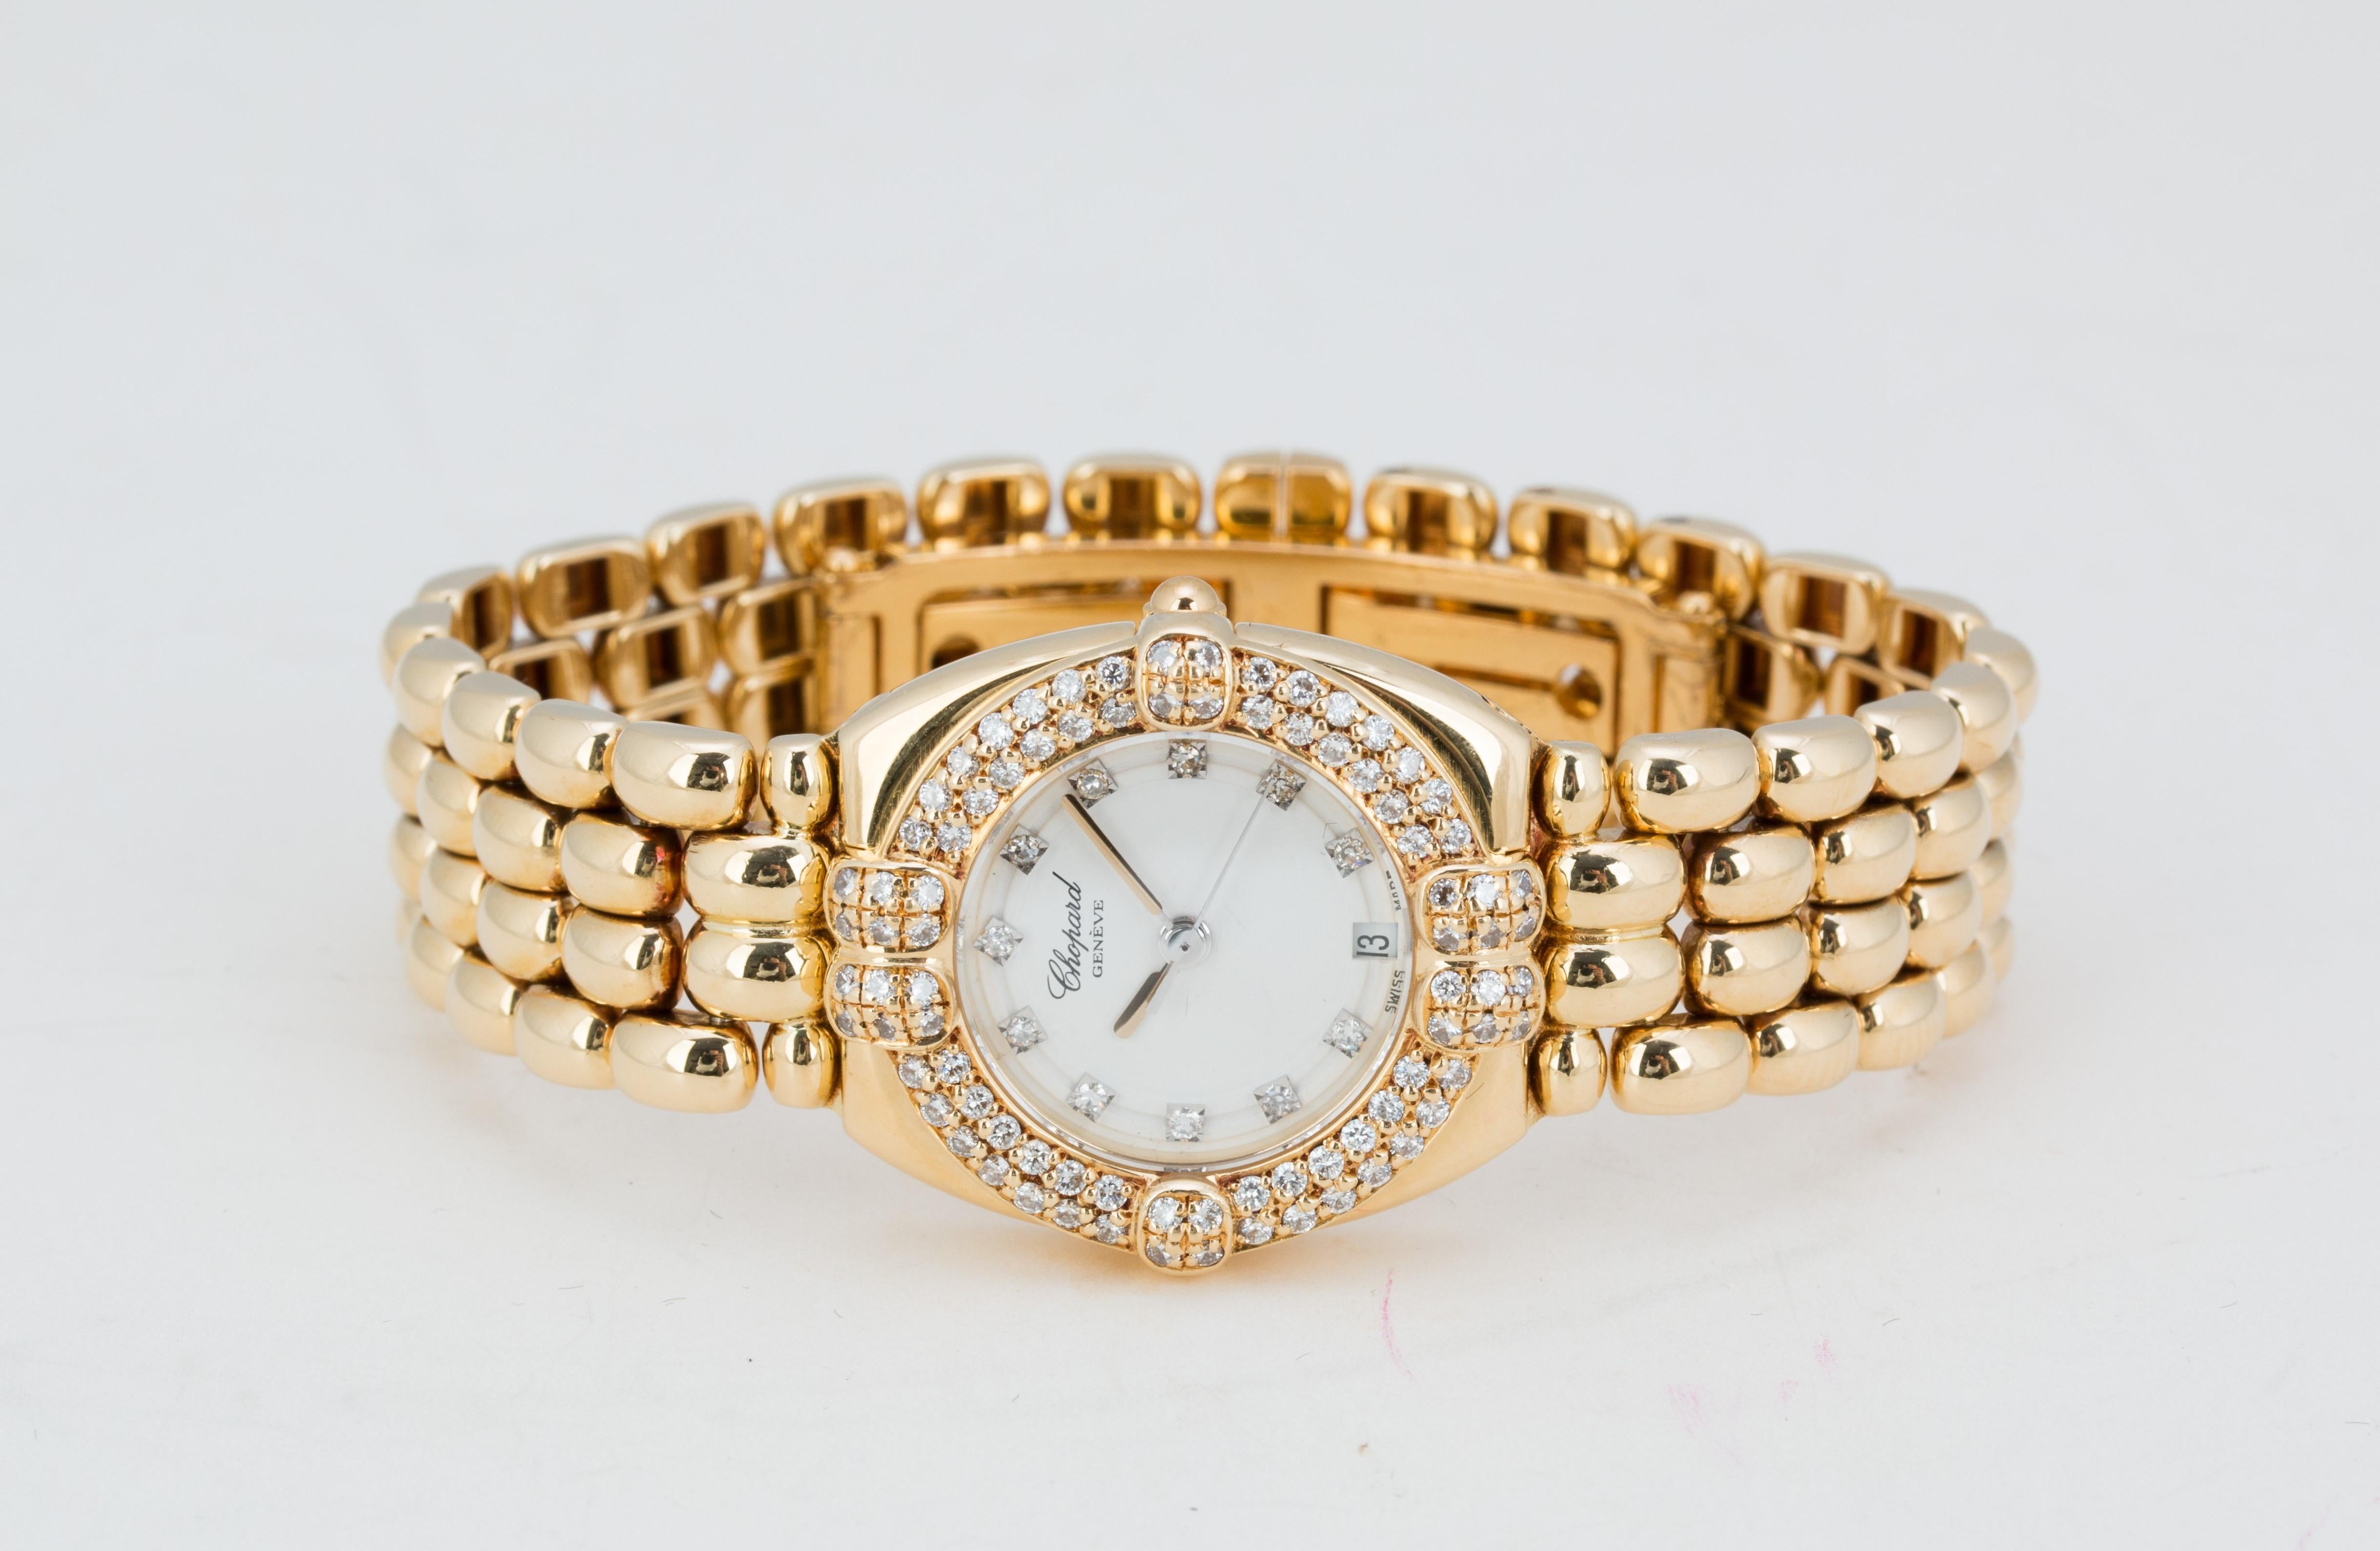 Authentic Chopard 'Gstaad' 18 karat yellow gold ladies watch with diamond bezel. Bezel is set with an estimated 0.75 carats of round brilliant cut diamonds (F-G in color, VS-SI clarity). Watch features a white face set with 12 diamond markers and a